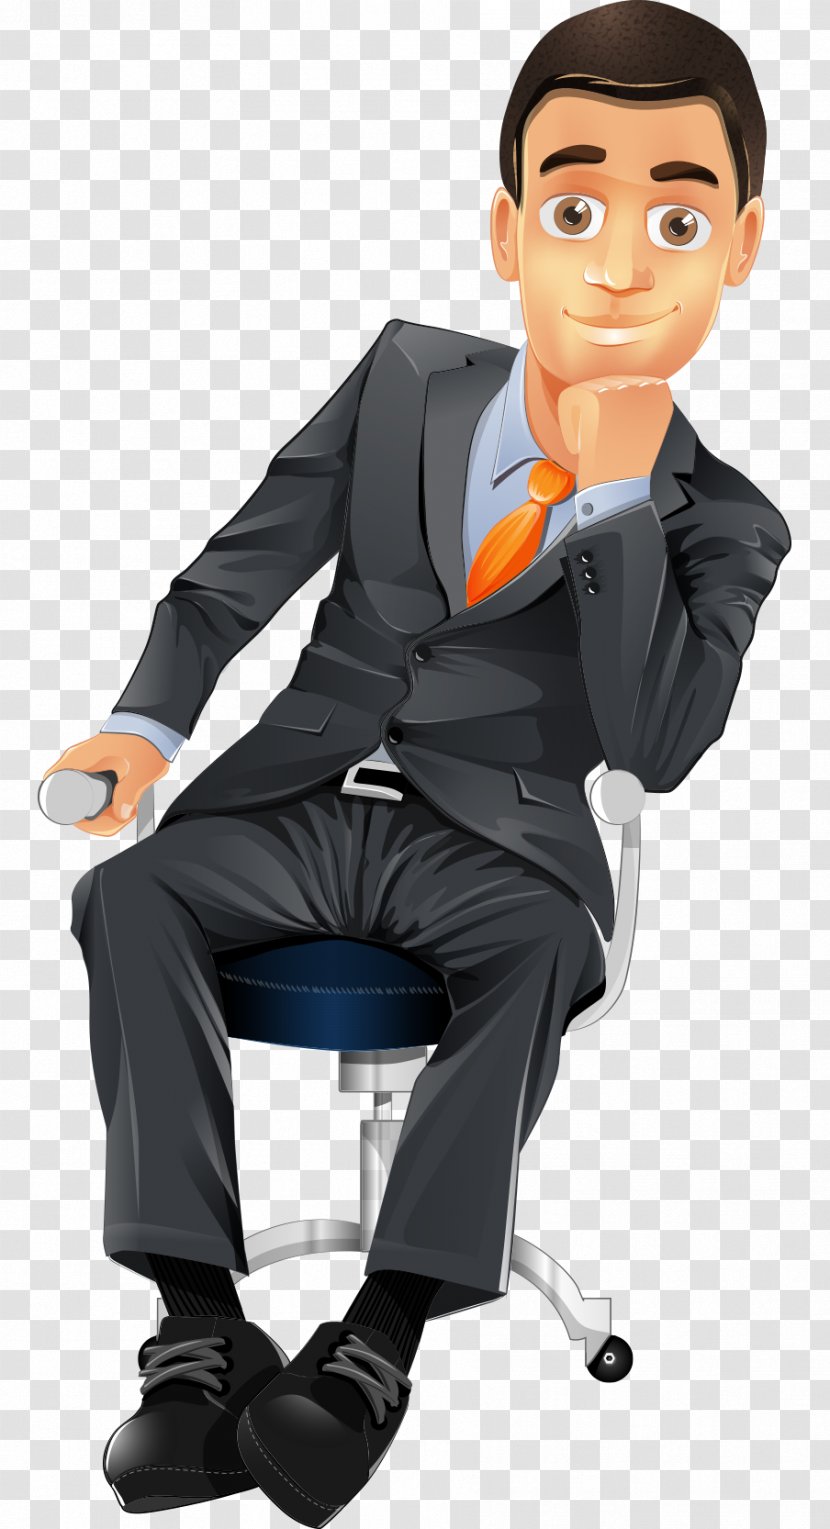 Cartoon Character Businessperson - Office - Hand-painted Business Man Sitting On A Chair Transparent PNG